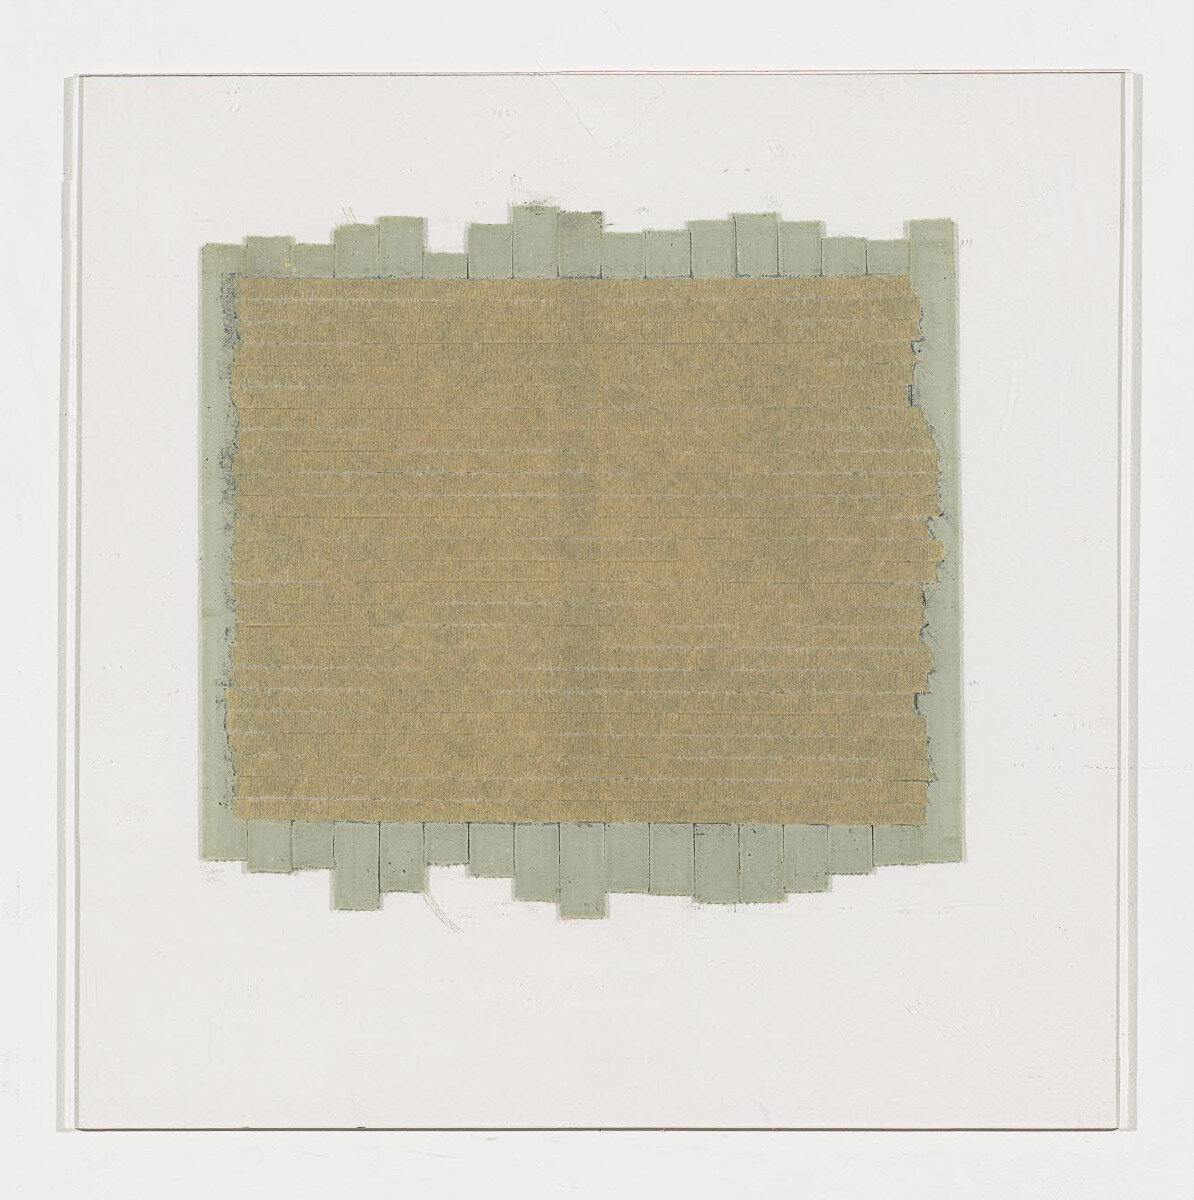  Untitled, 1977, 12 x 12 inches, pastel and tape on Plexiglass 